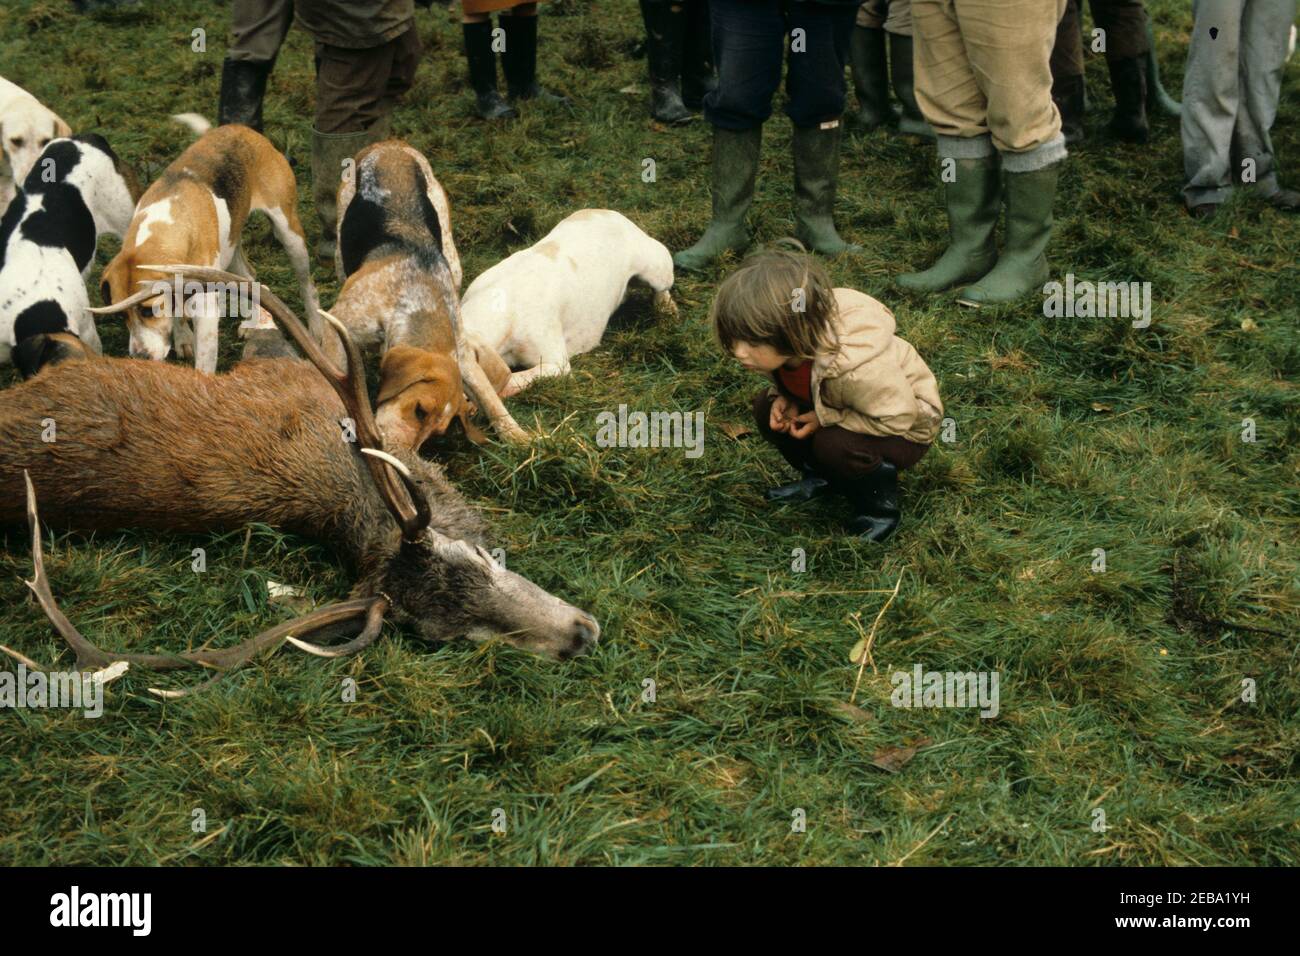 Devon and Somerset Staghounds October 8th 1981. After the kill a curious child supporter looks into the eye of the dead stag. Hounds lap the blood from the sliced open stomach of the deer. This was taken long before the Hunting Act 2004 that banned this pastime on grounds of cruelty. Stock Photo